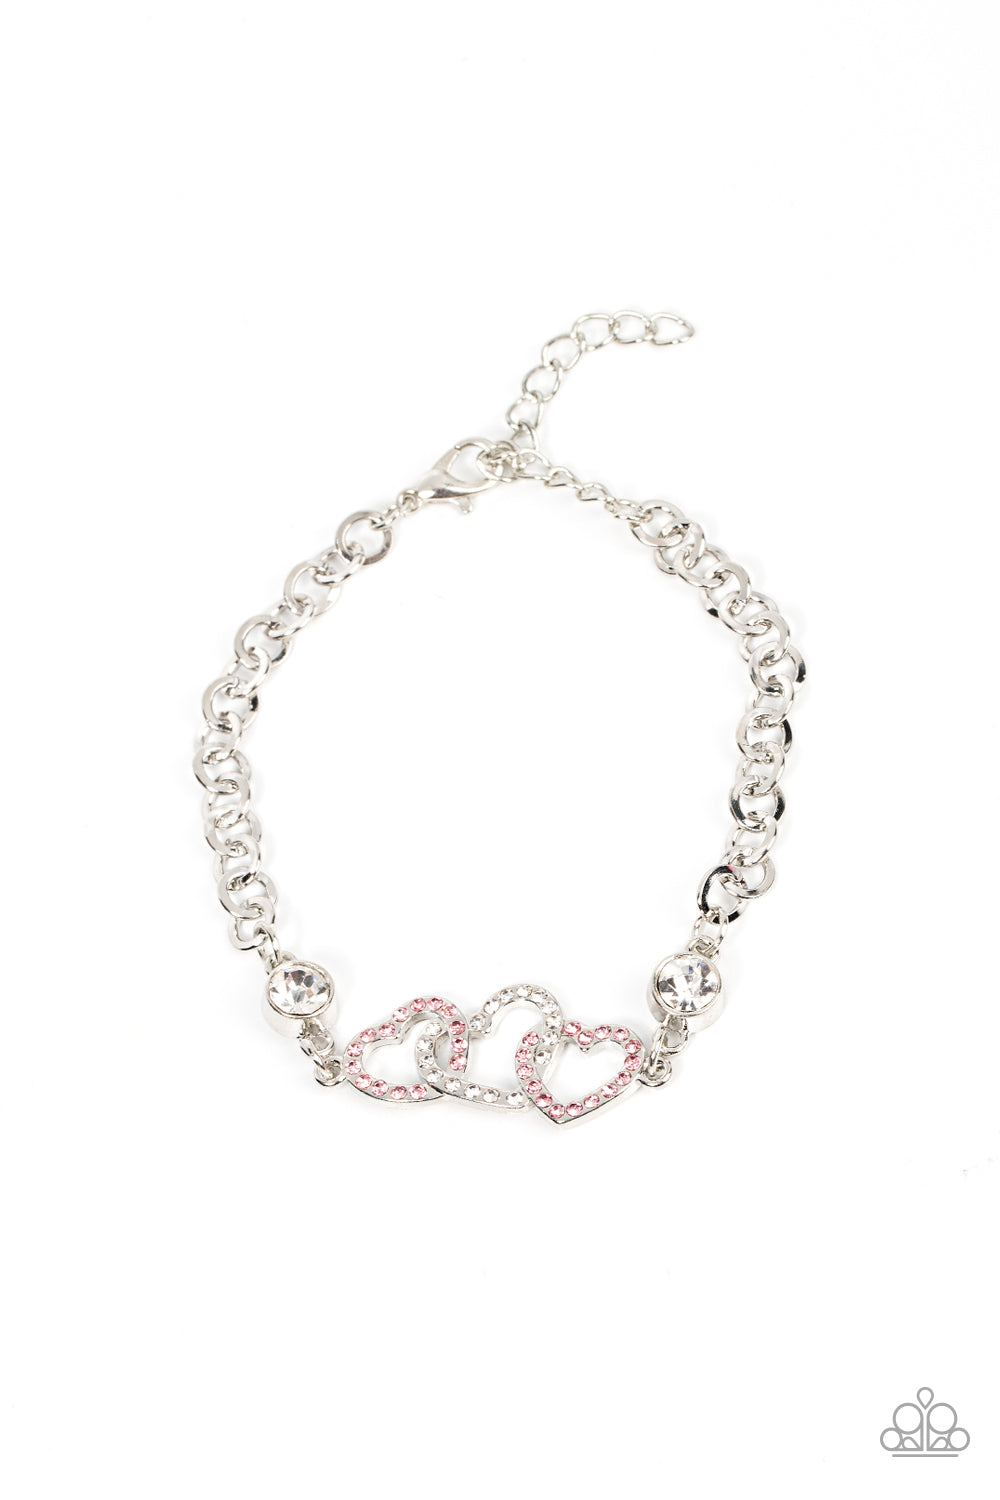 Paparazzi Desirable Dazzle - Pink Bracelet - A Finishing Touch Jewelry